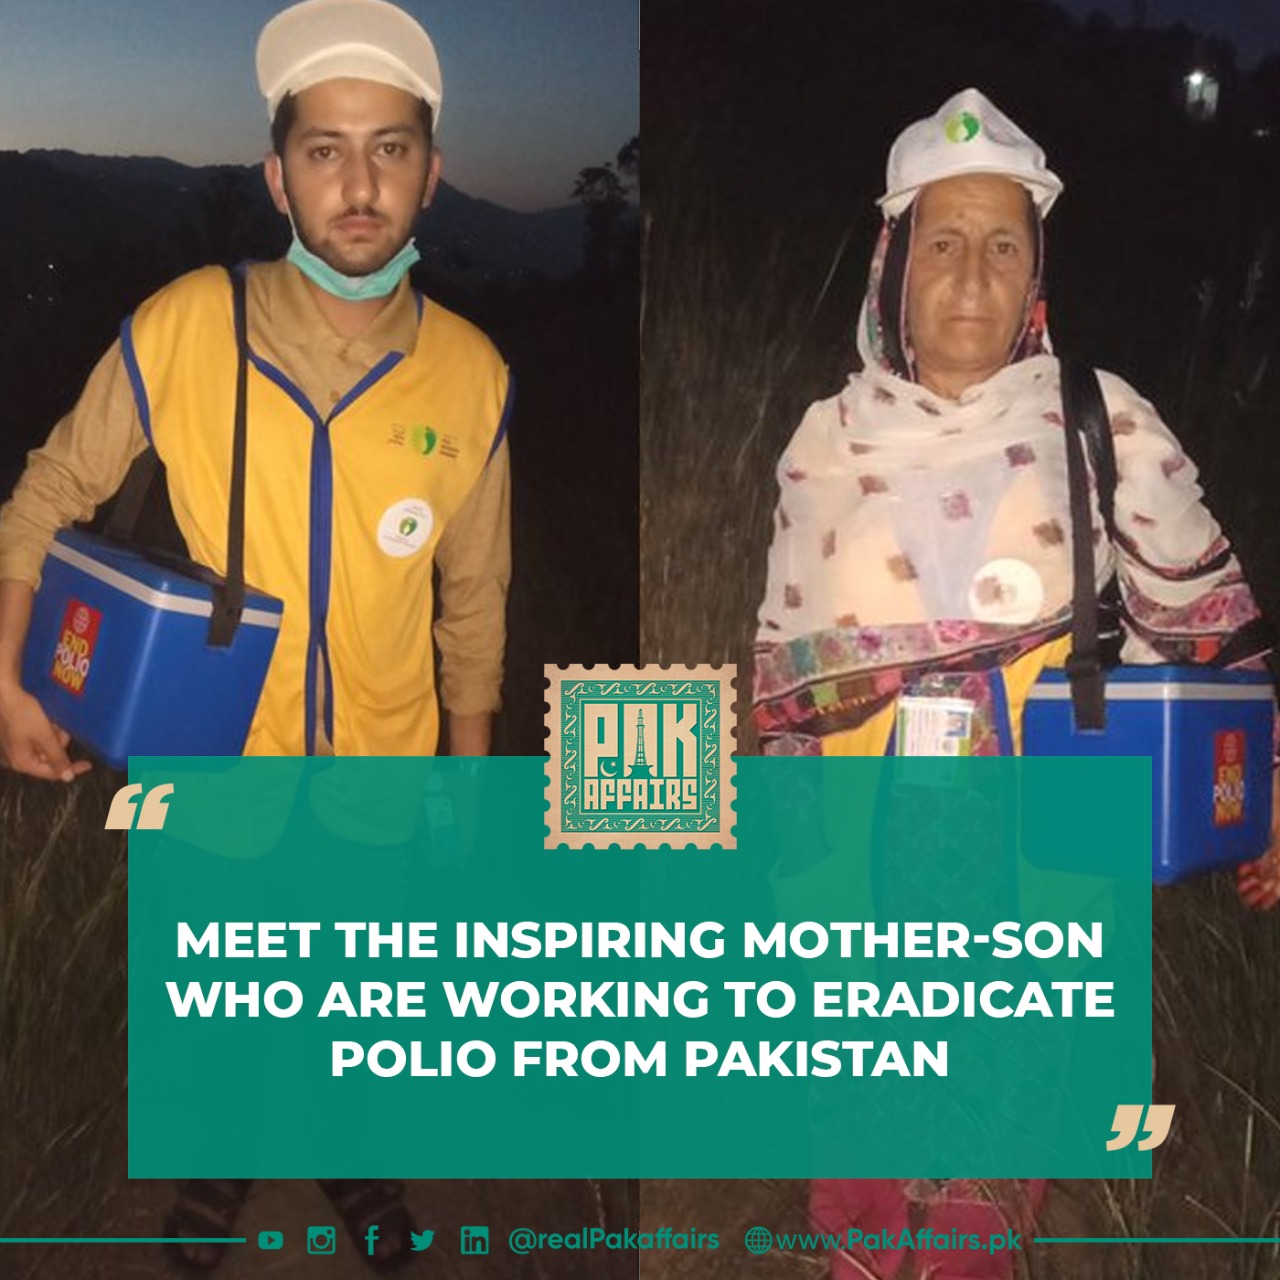 Meet the inspiring mother-son duo who are working tirelessly to eradicate polio from Pakistan